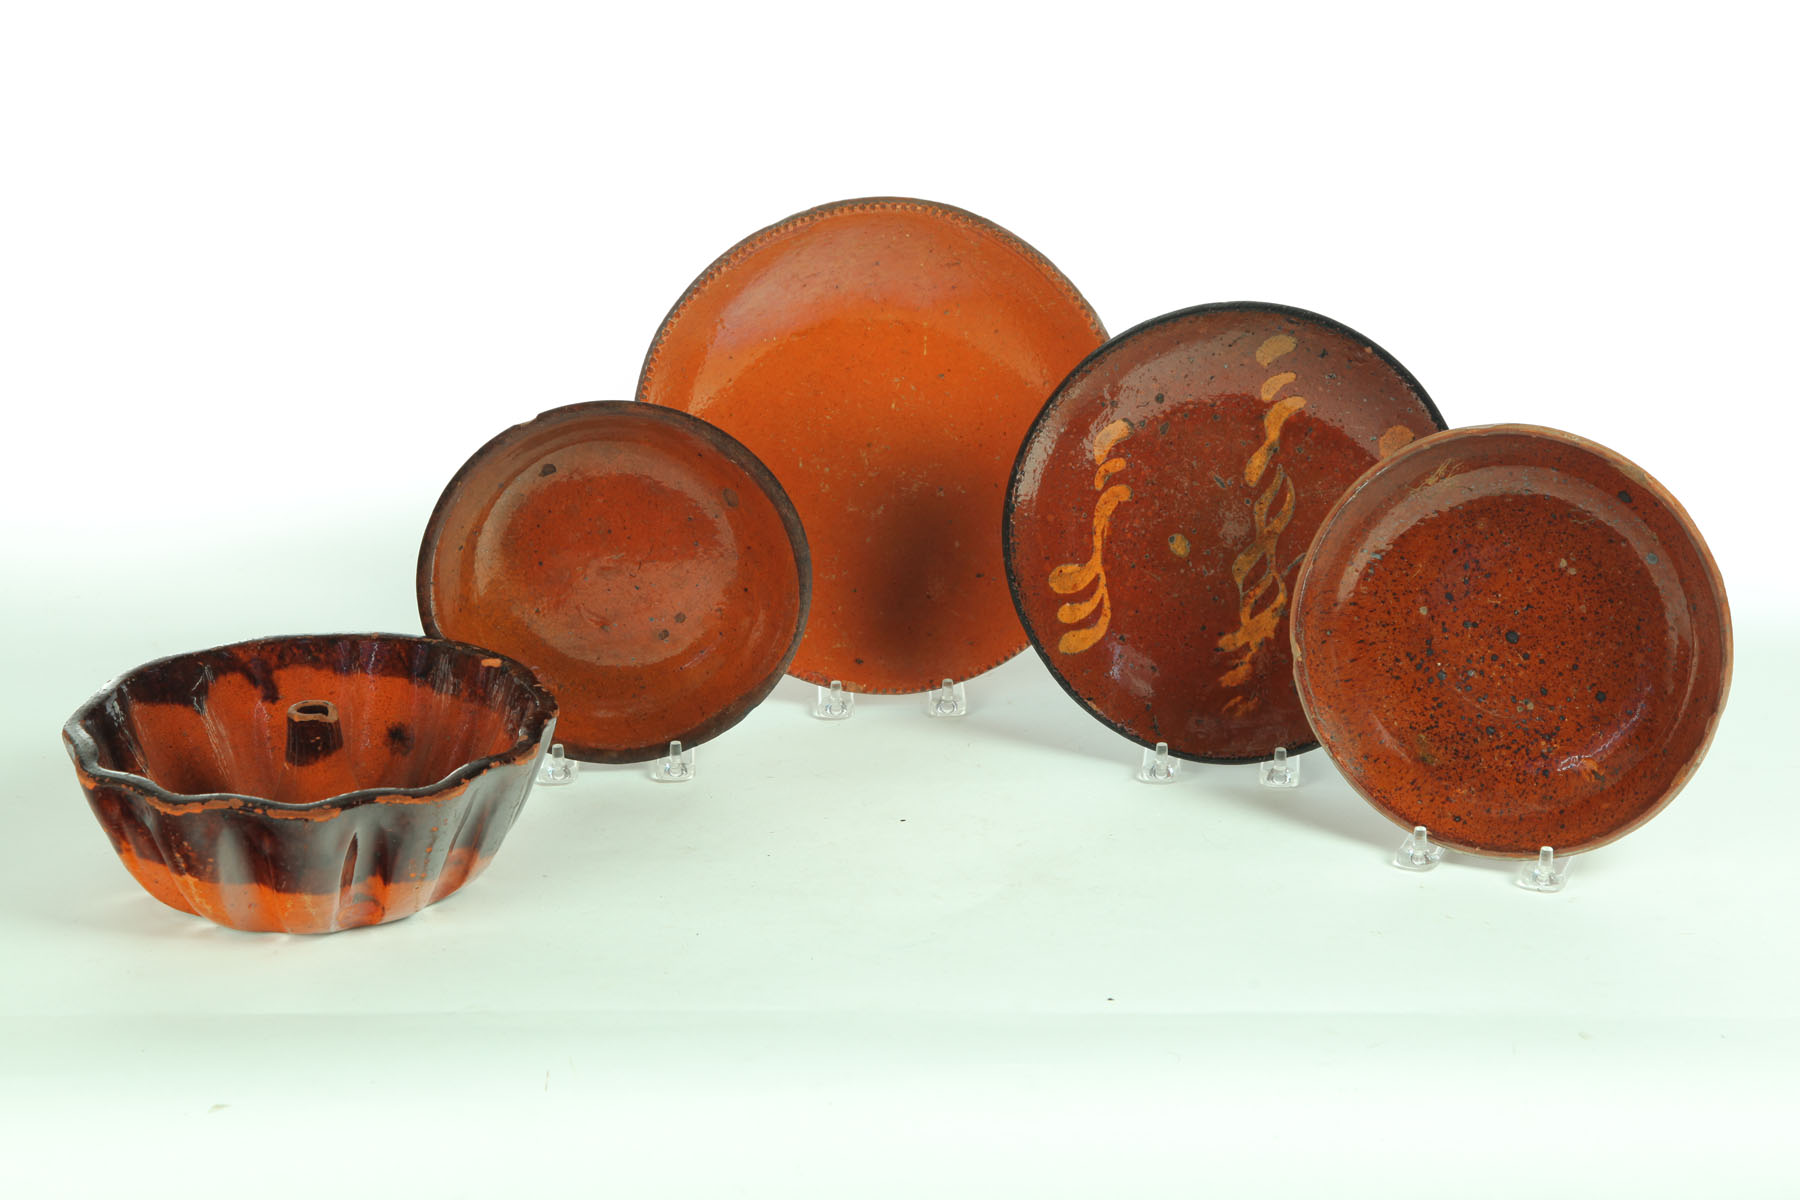 FIVE PIECES OF REDWARE.  American